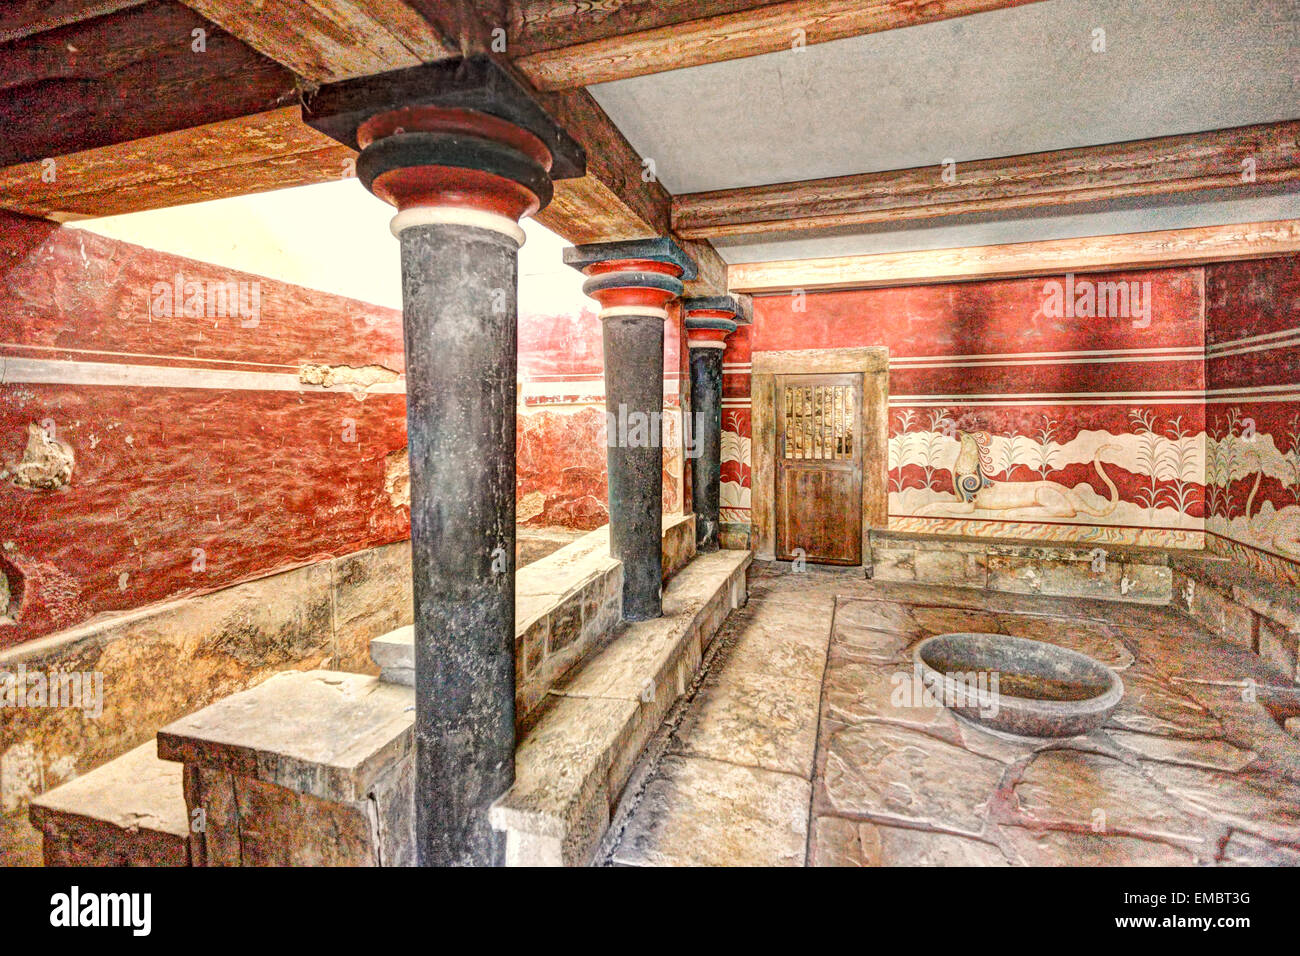 The Throne Room Of The Palace In Knossos At Crete Greece